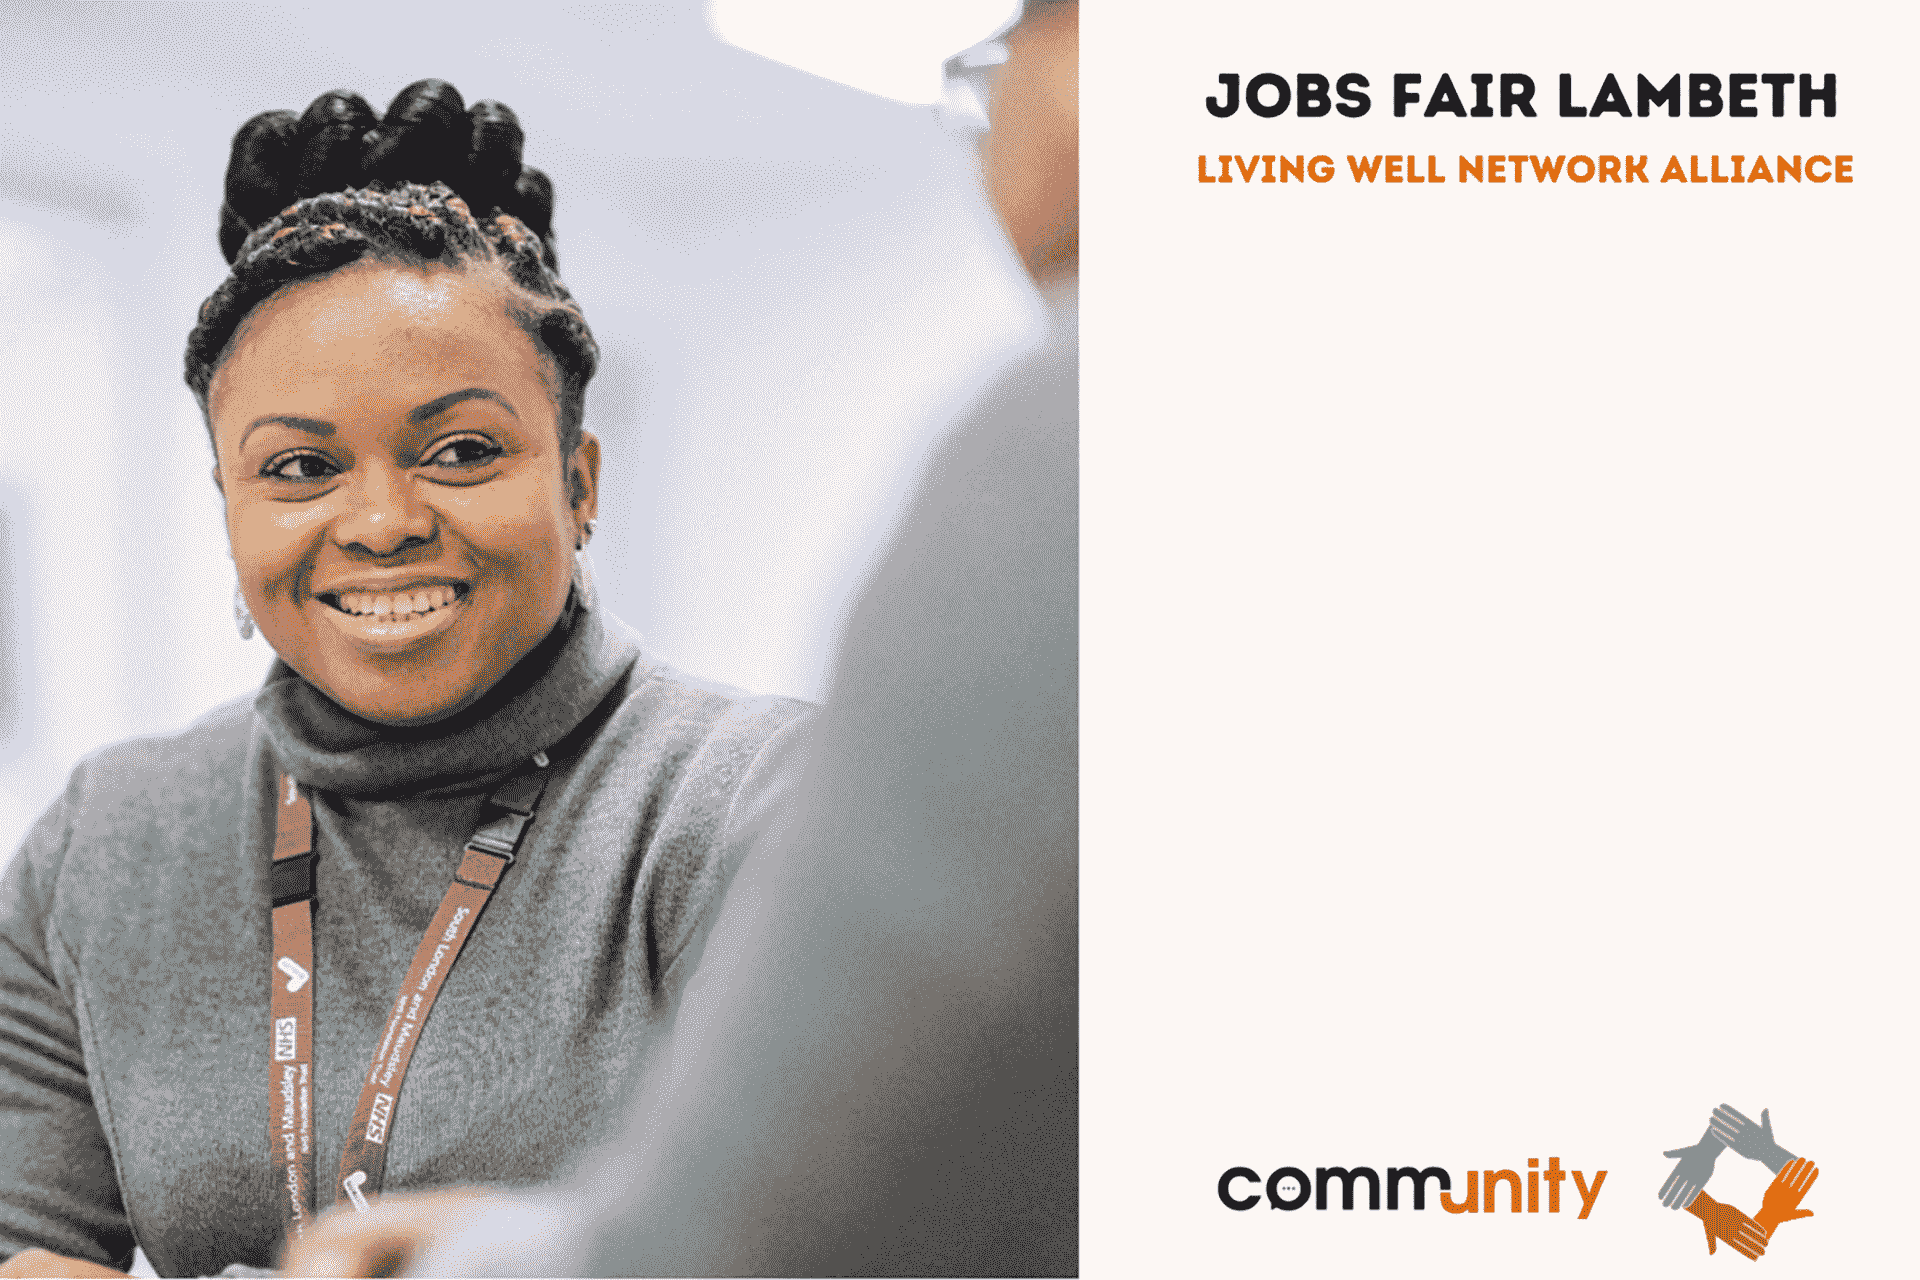 Cover photo image of a Black woman smiling. Text says: Jobs Fair Lambeth, Living Well Alliance Network